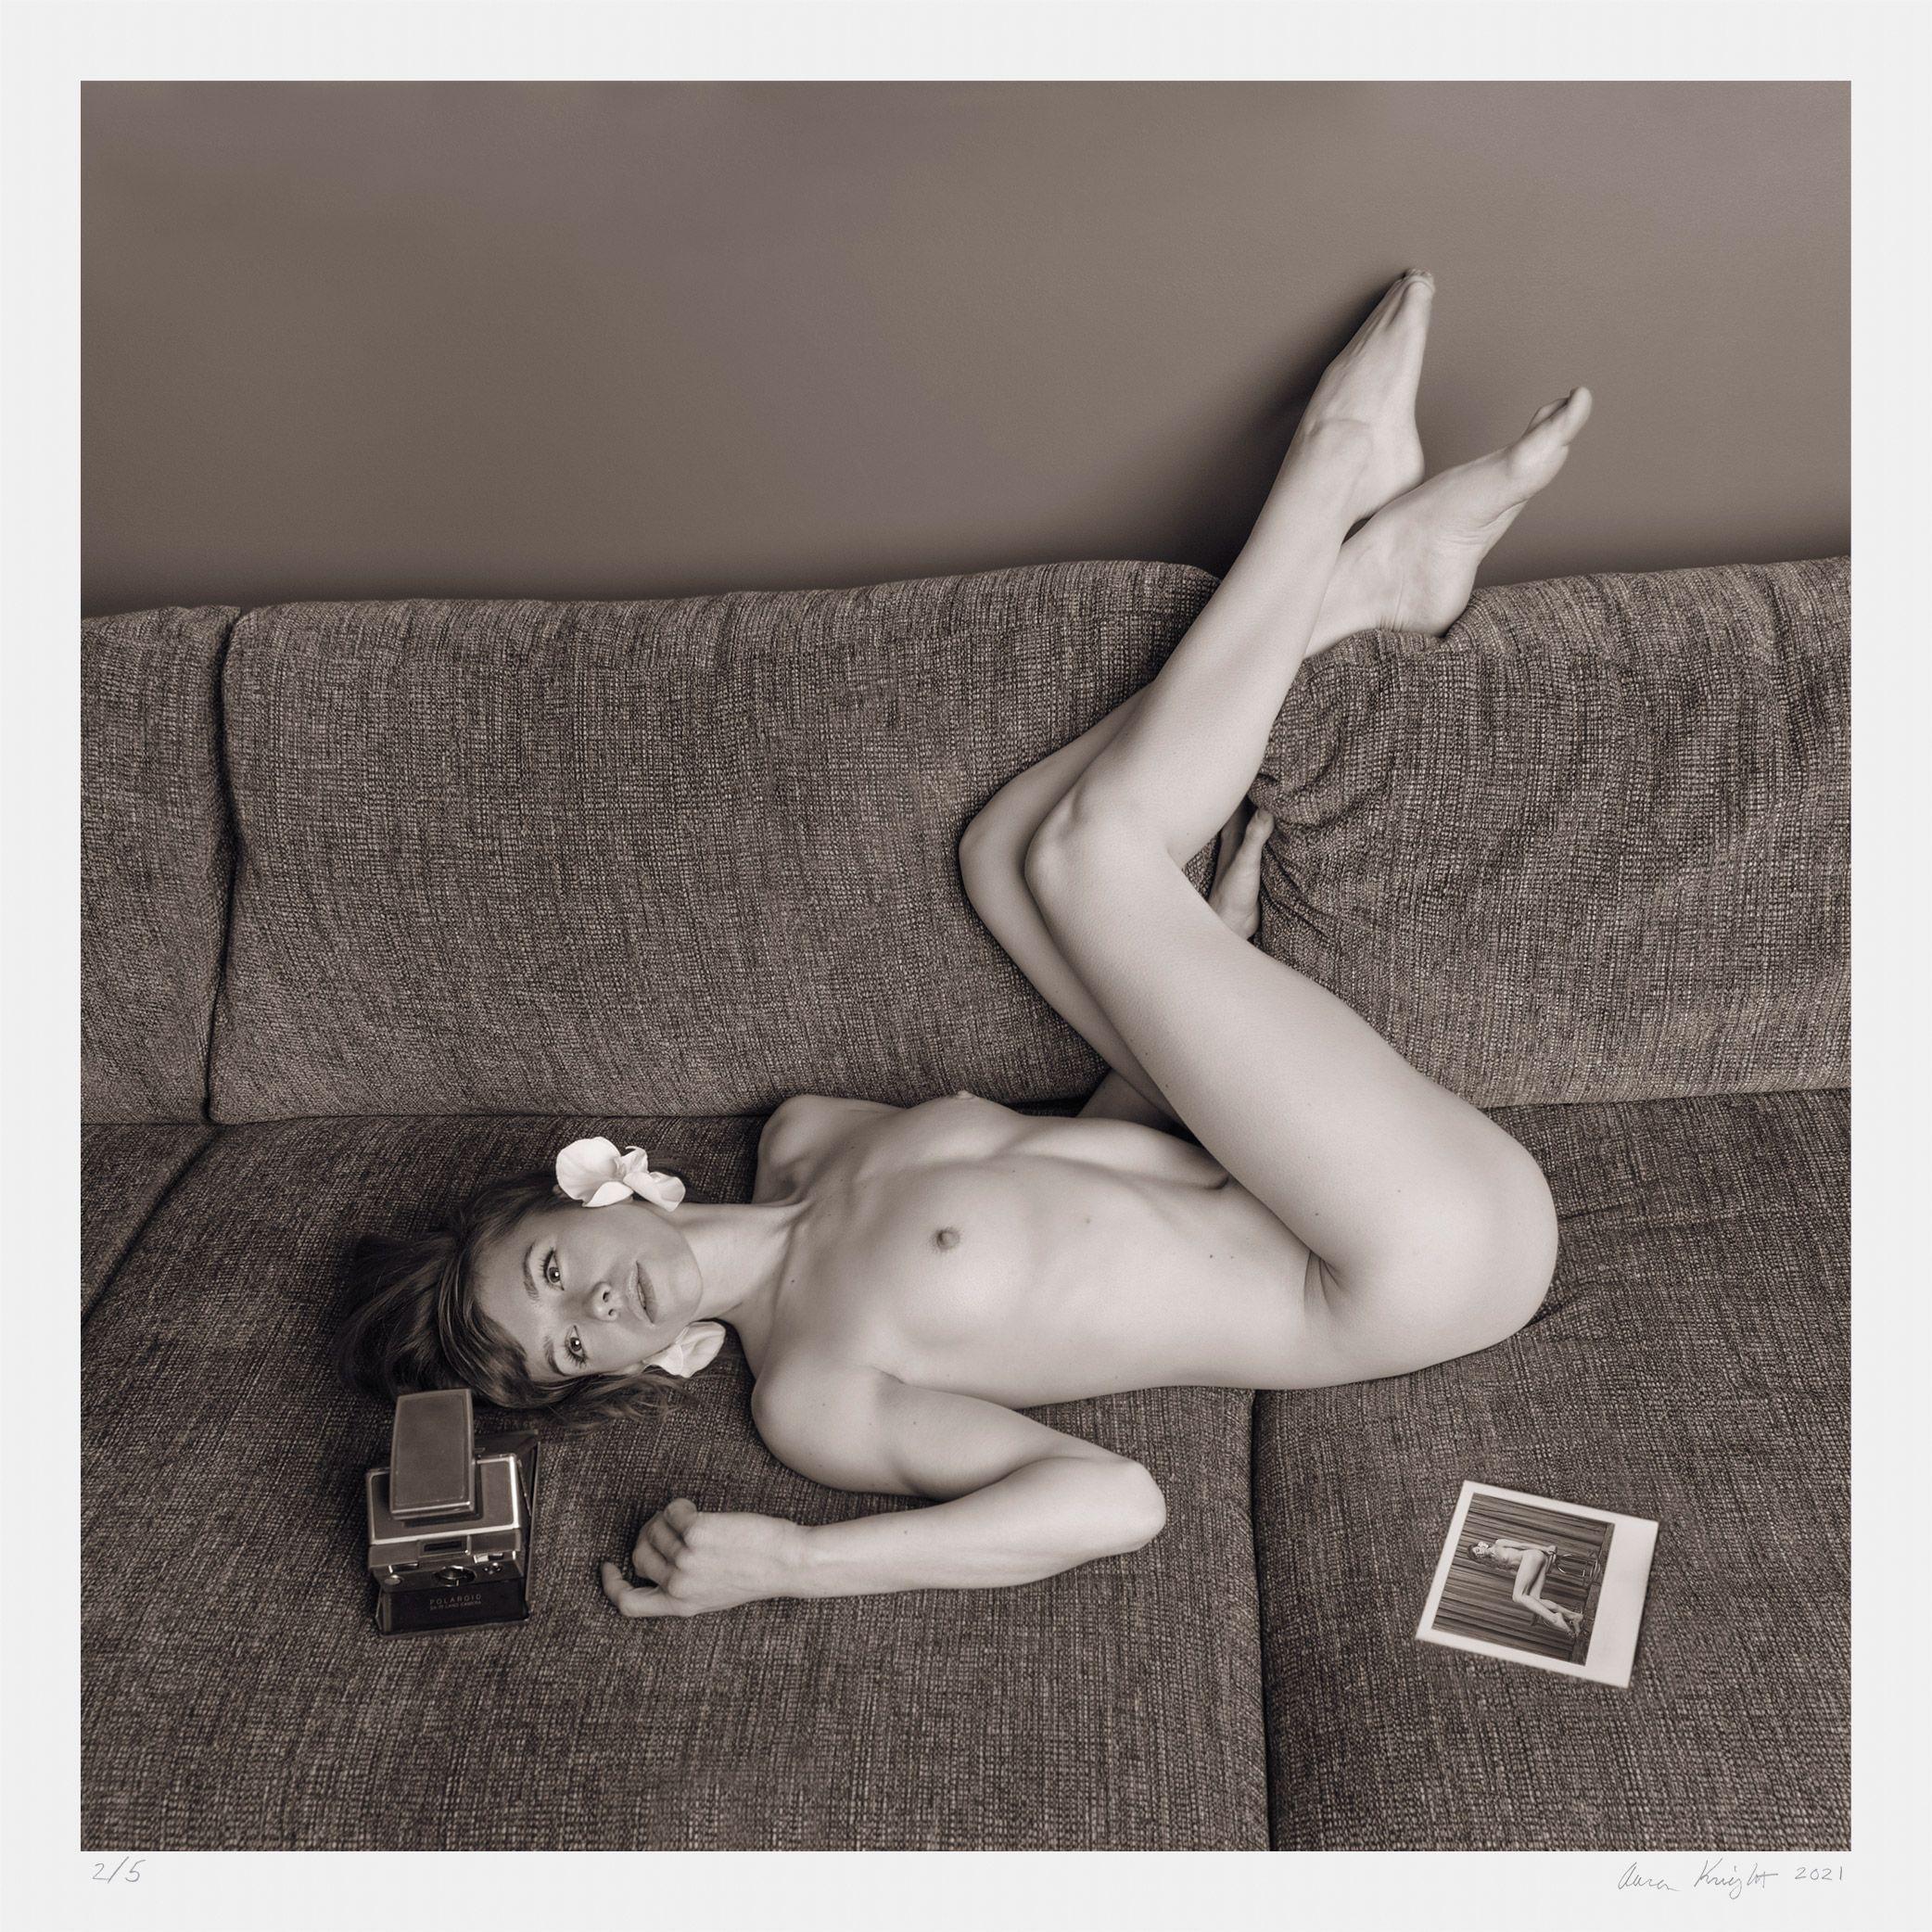 Aaron Knight Black and White Photograph - Polaroid Daydream, Photograph, Archival Ink Jet